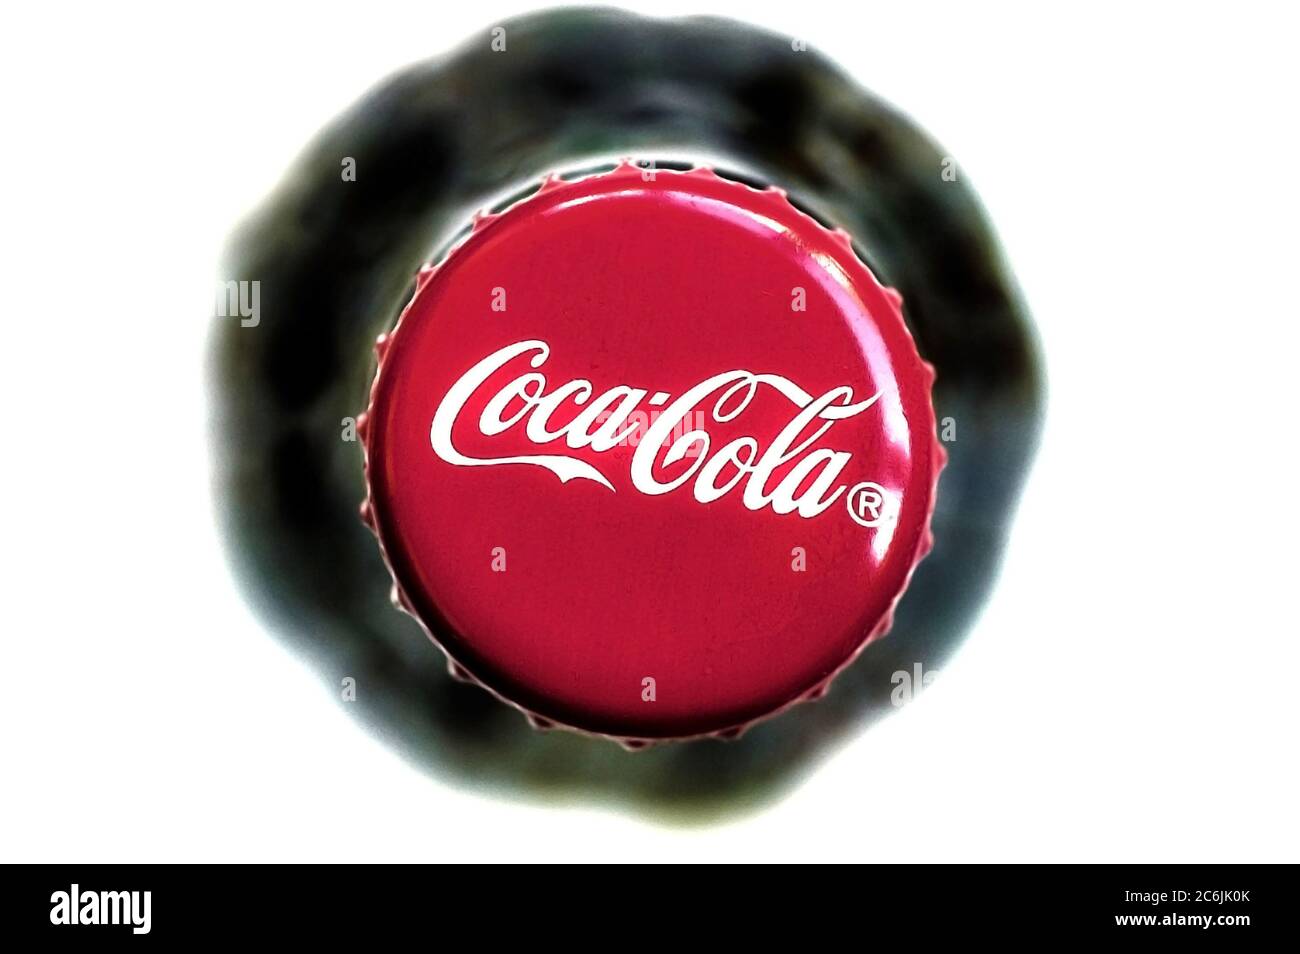 BELGRADE, SERBIA  July 14, 2017: Top view of red cap from bottle of Coca cola on a white background Stock Photo